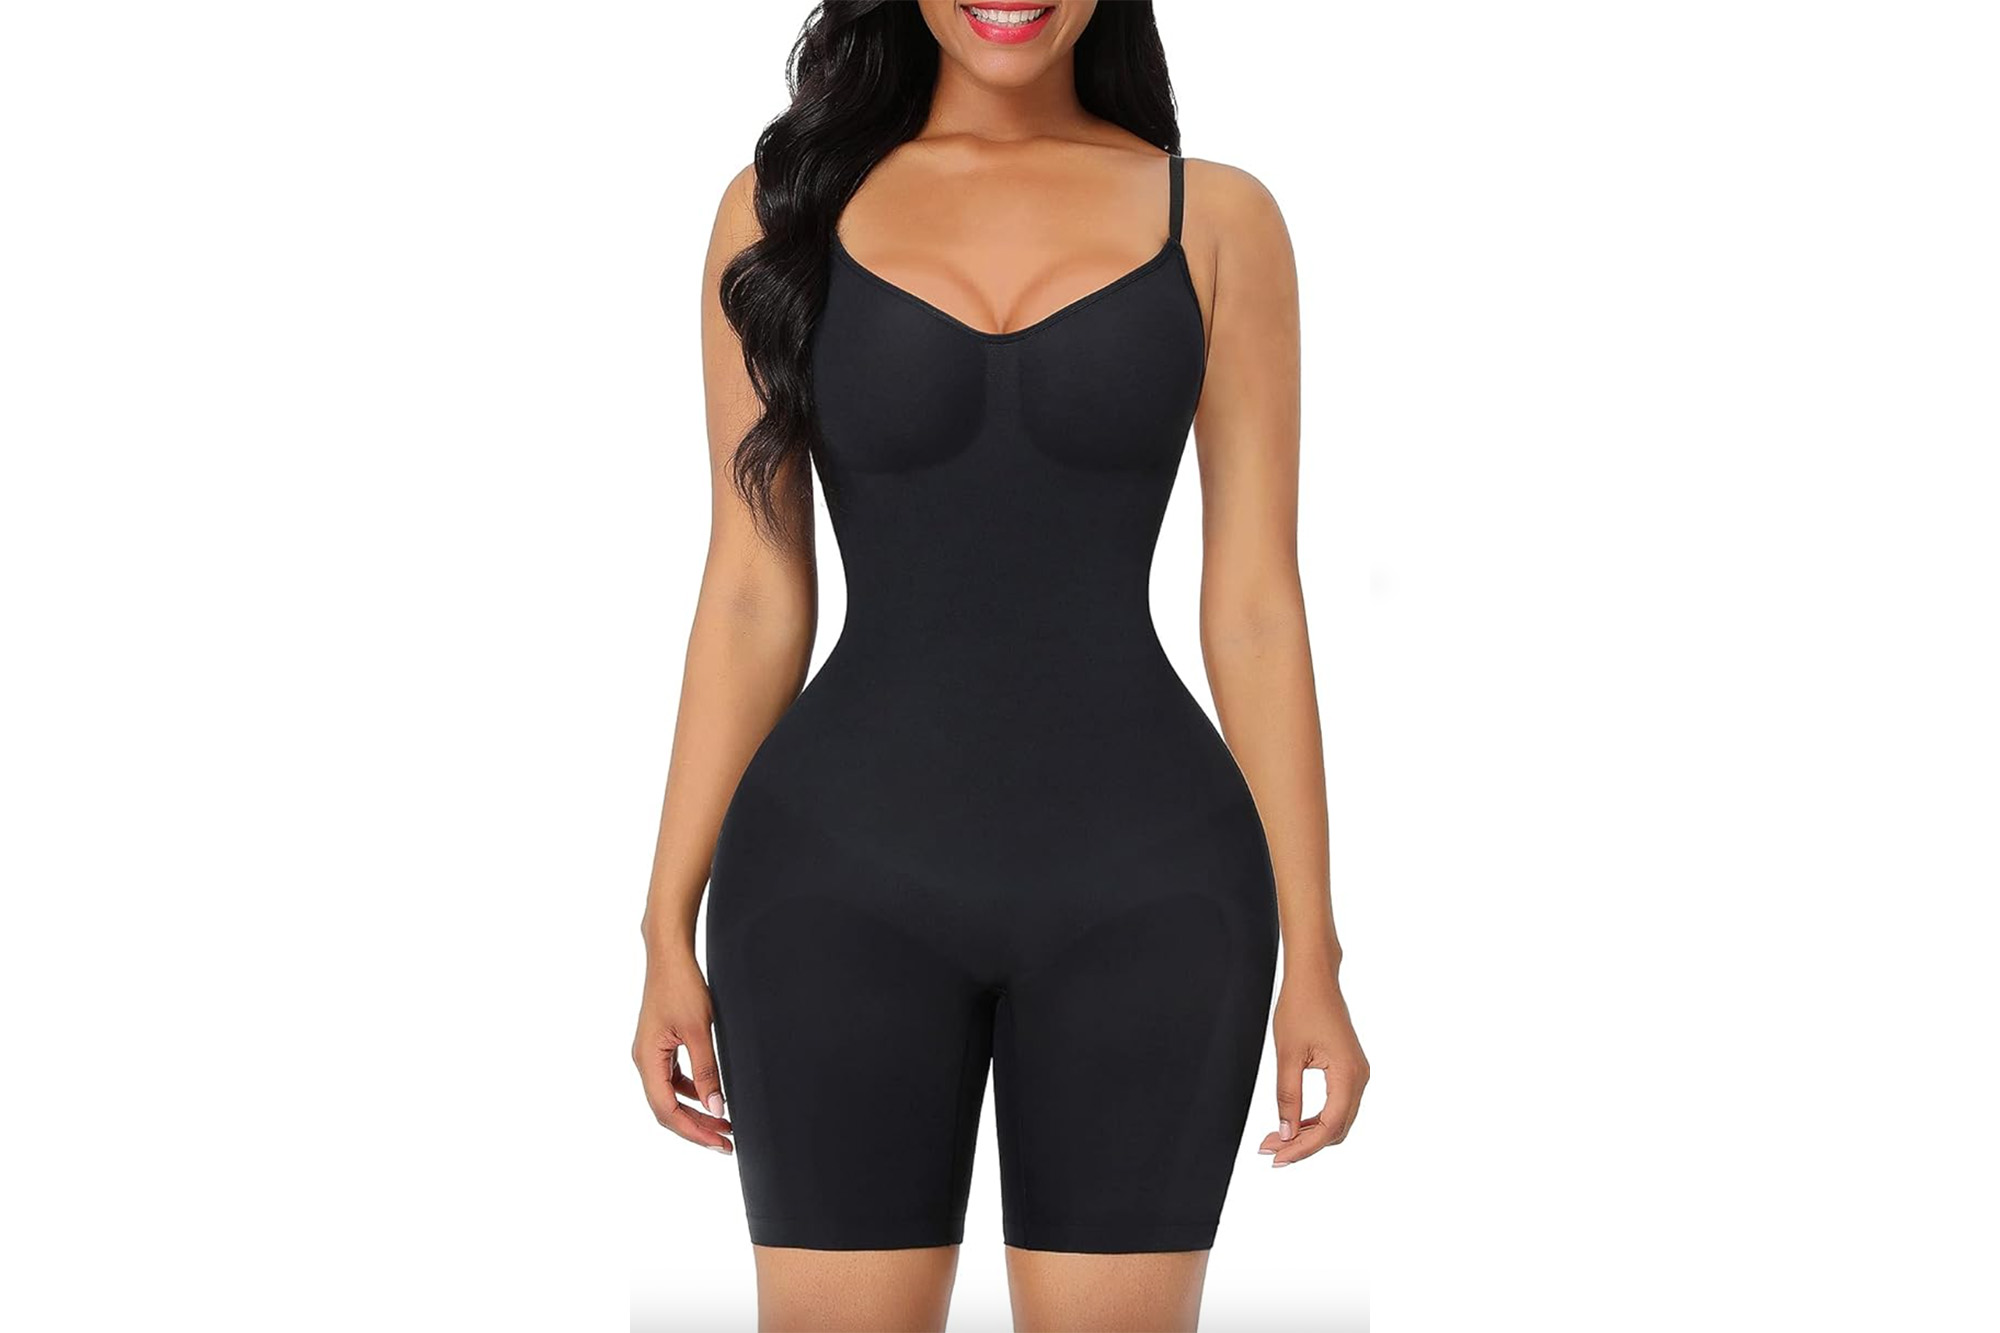 This 'Comfortable' Shapewear Bodysuit Is 60% Off at